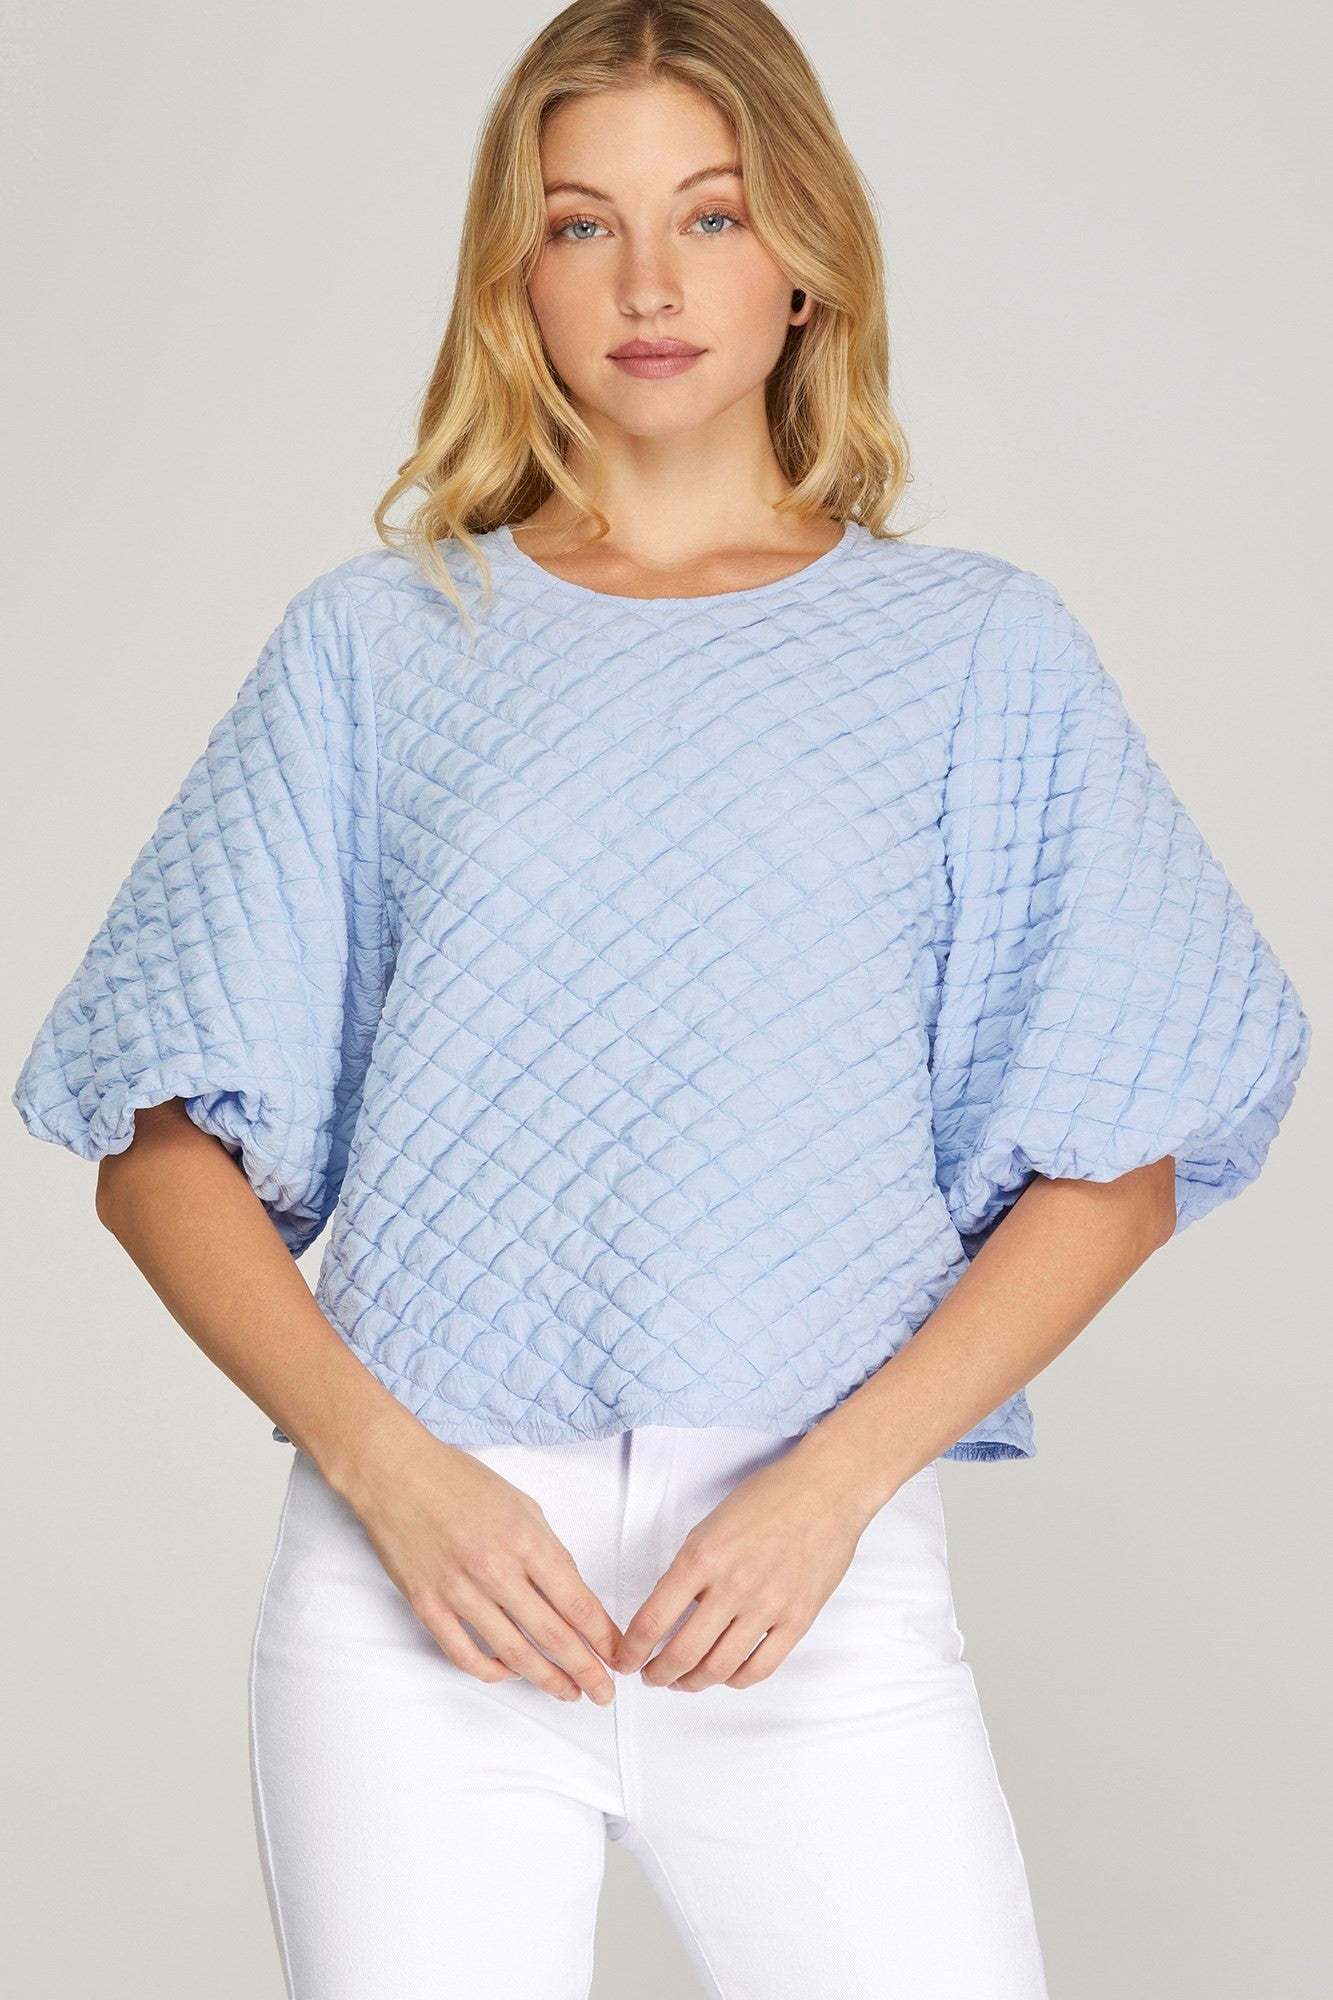 Bubble Textured Top